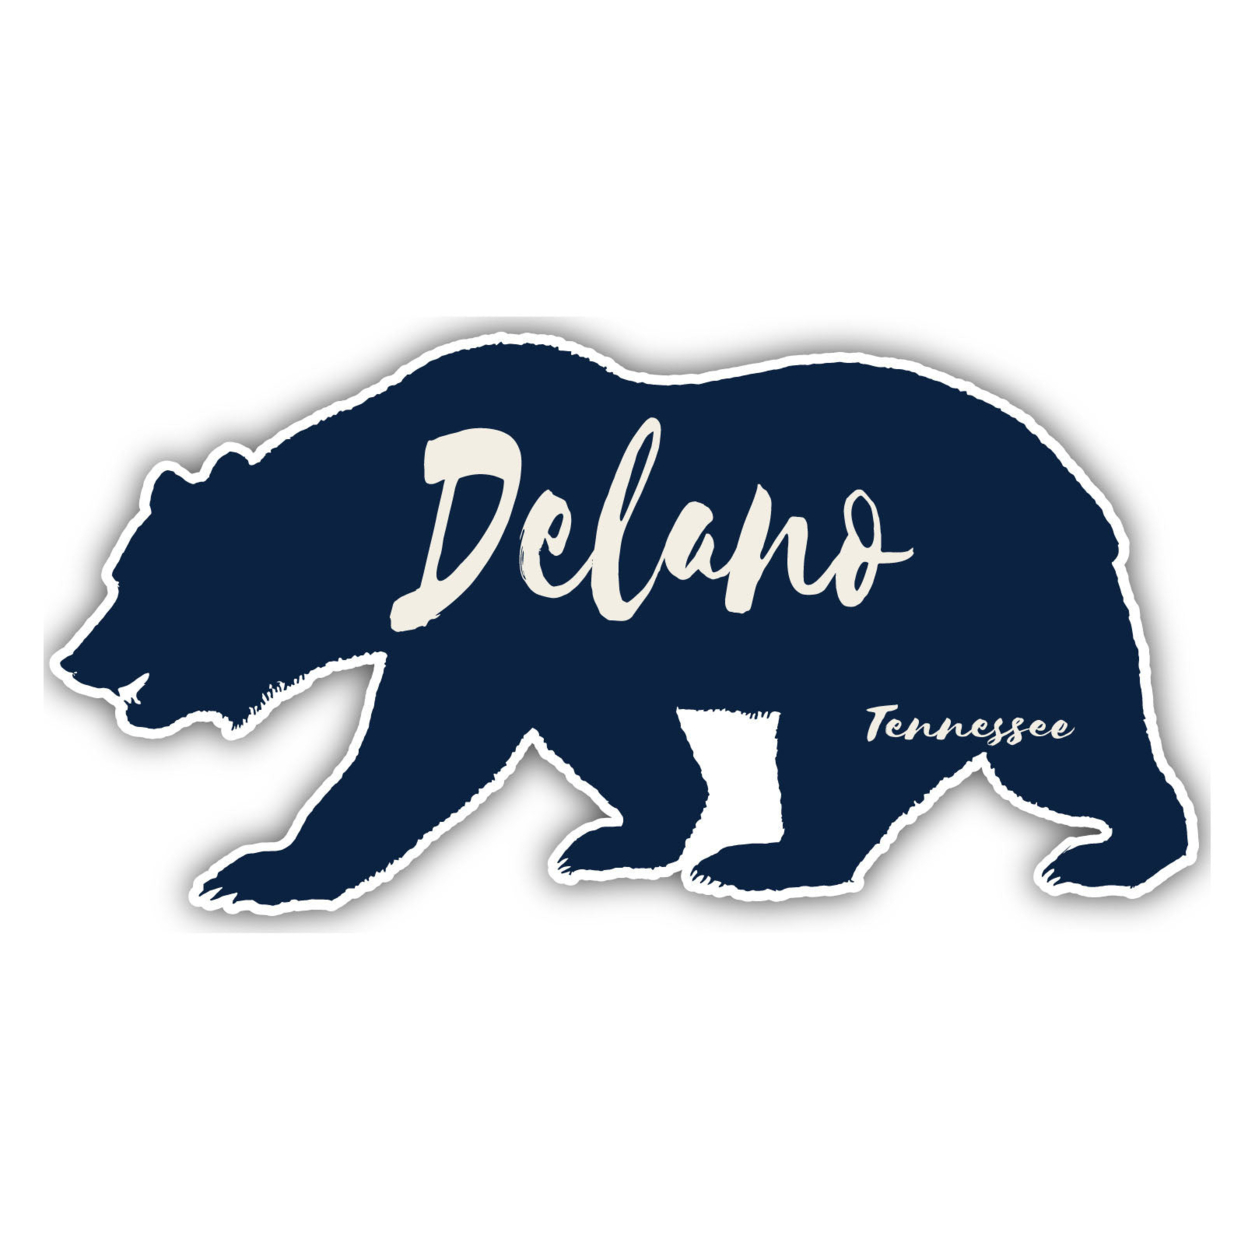 Delano Tennessee Souvenir Decorative Stickers (Choose Theme And Size) - 4-Pack, 2-Inch, Bear